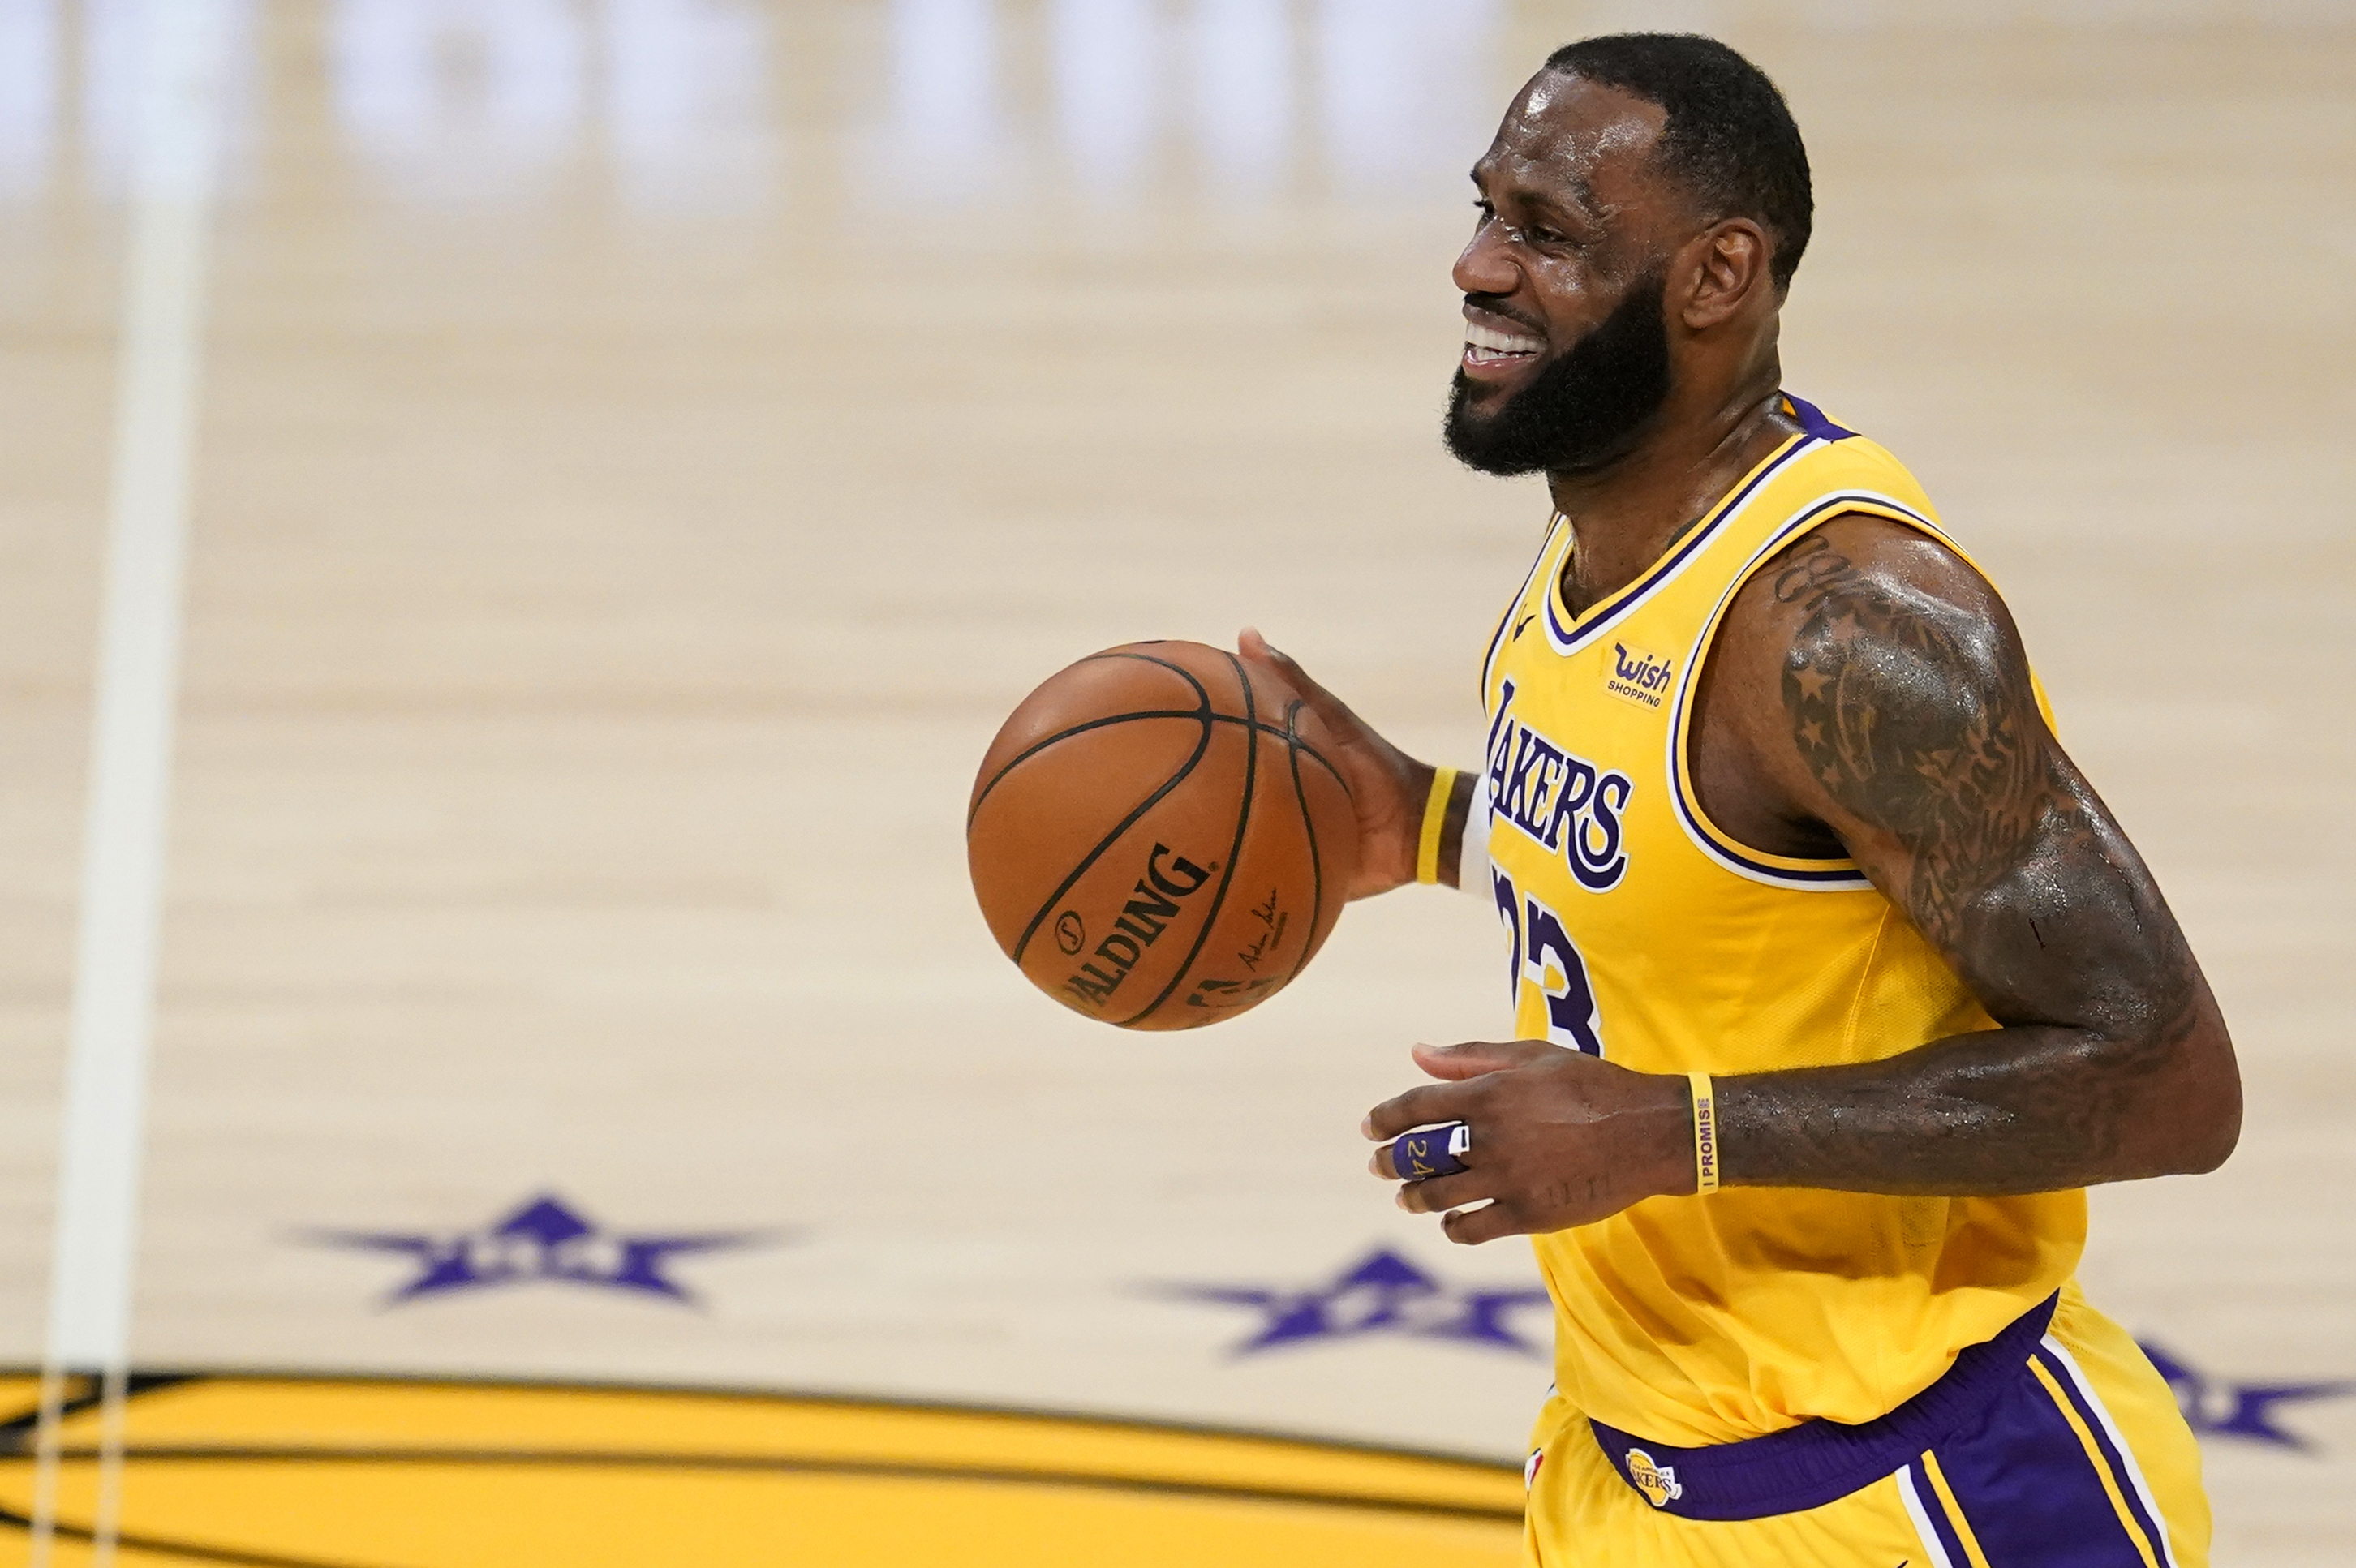 Nba Power Rankings Lakers Make Up Ground And A New No 1 Emerges Bleacher Report Latest News Videos And Highlights